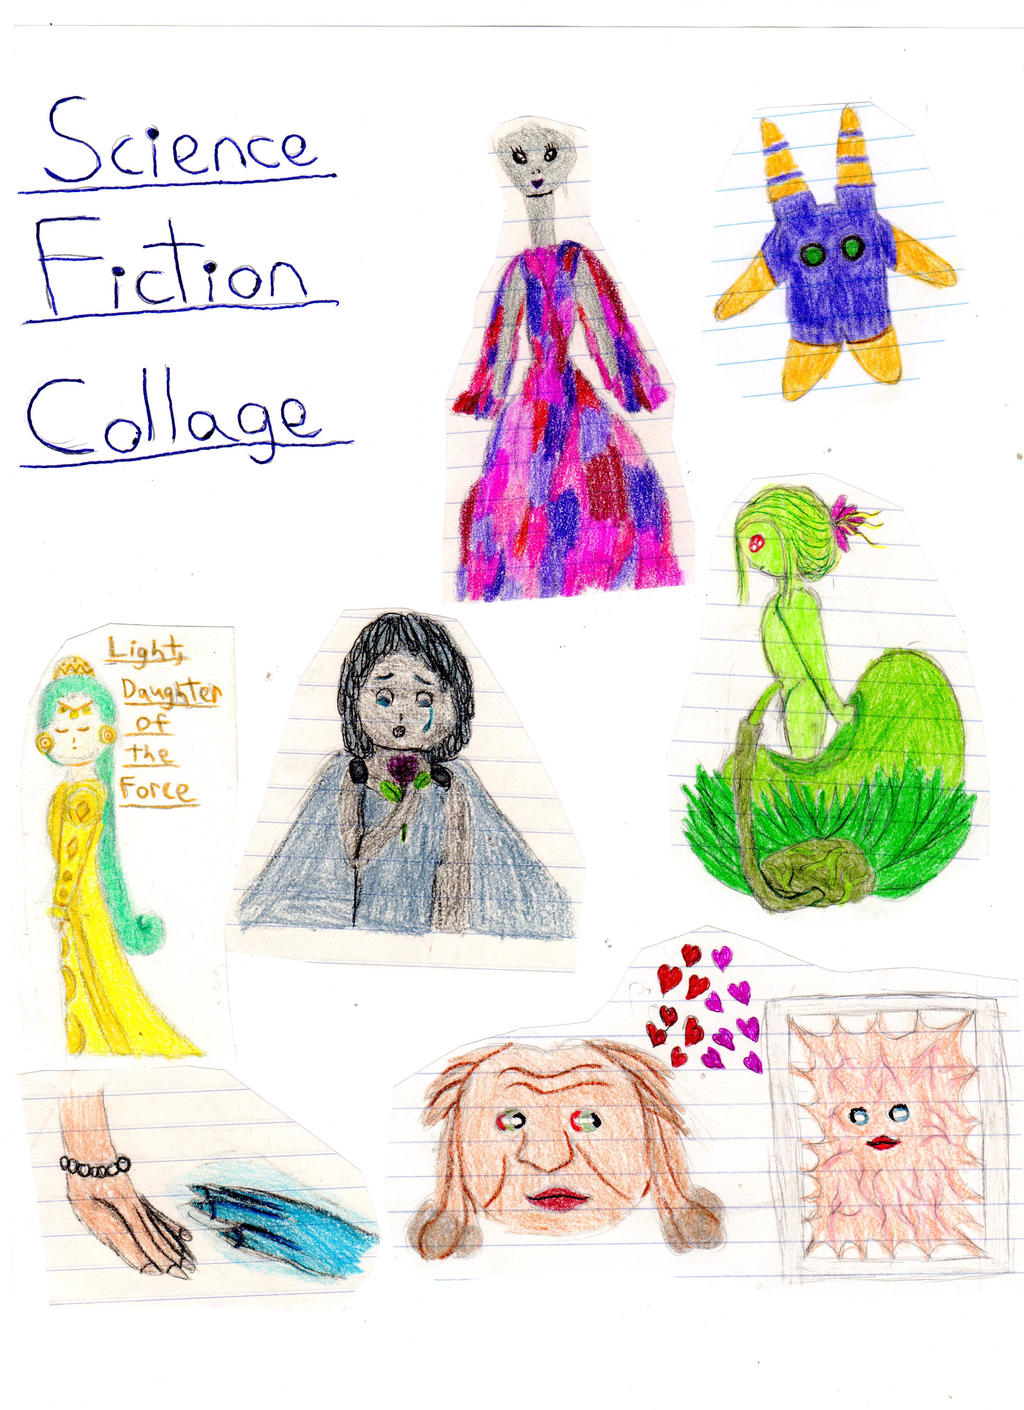 Science Fiction Collage